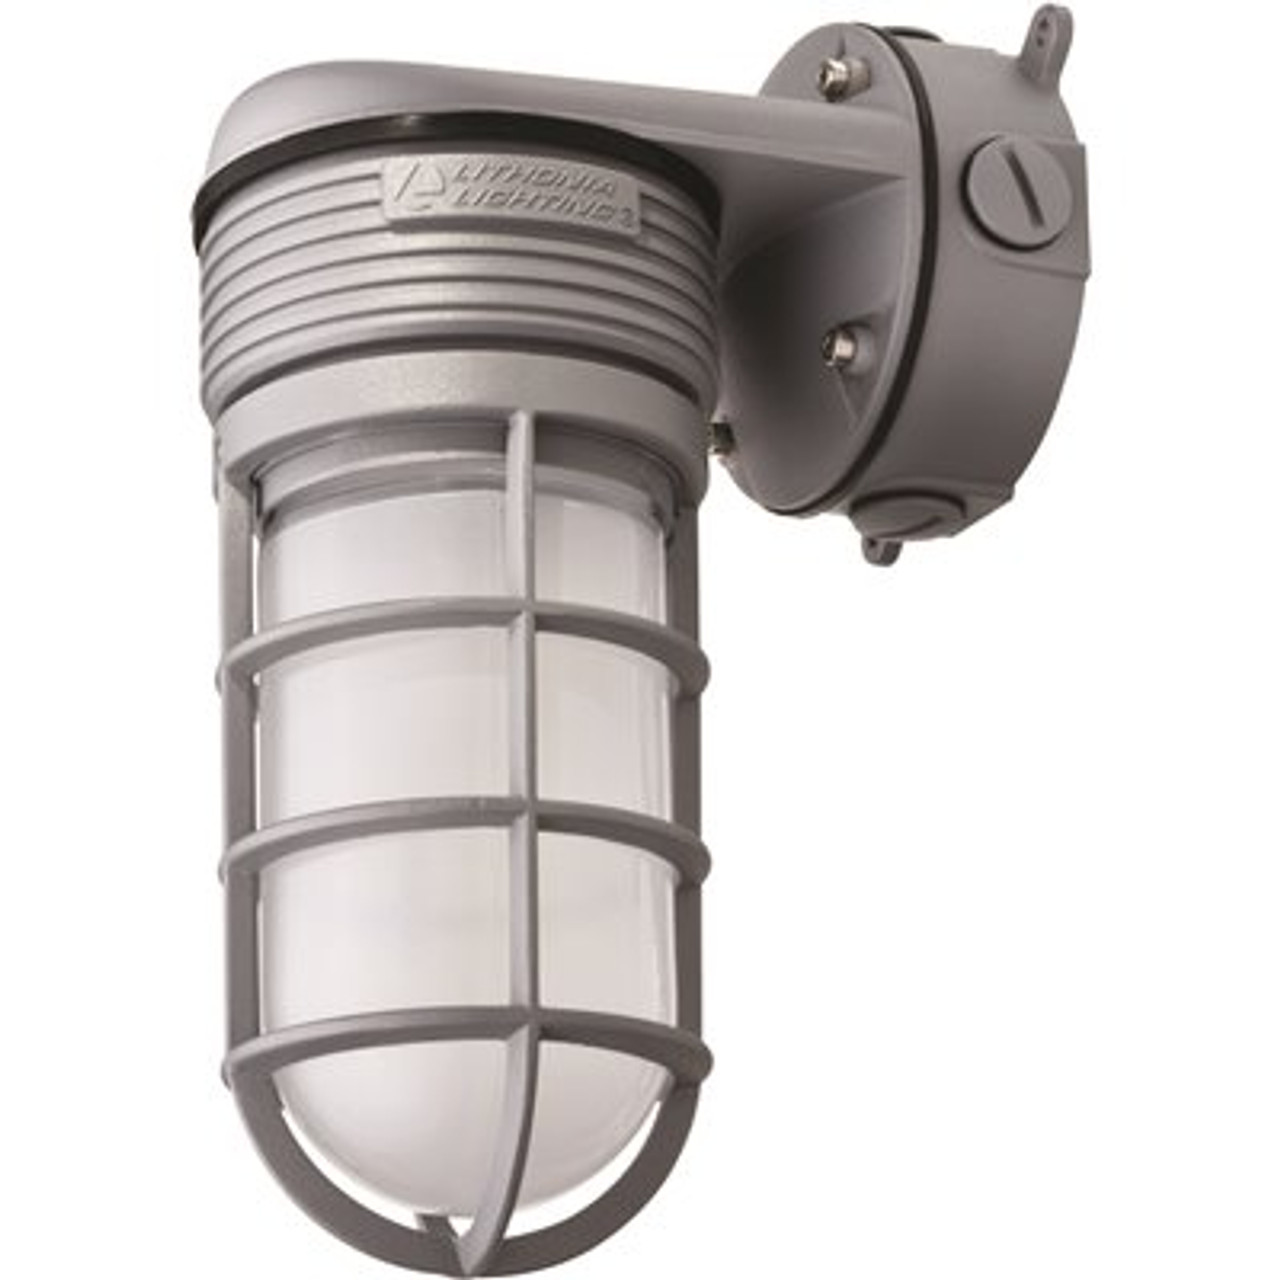 Lithonia Lighting Contractor Select 1 Light Gray 120/277 Integrated LED Outdoor Vapor Tight Wall Lantern Sconce 1-Pack